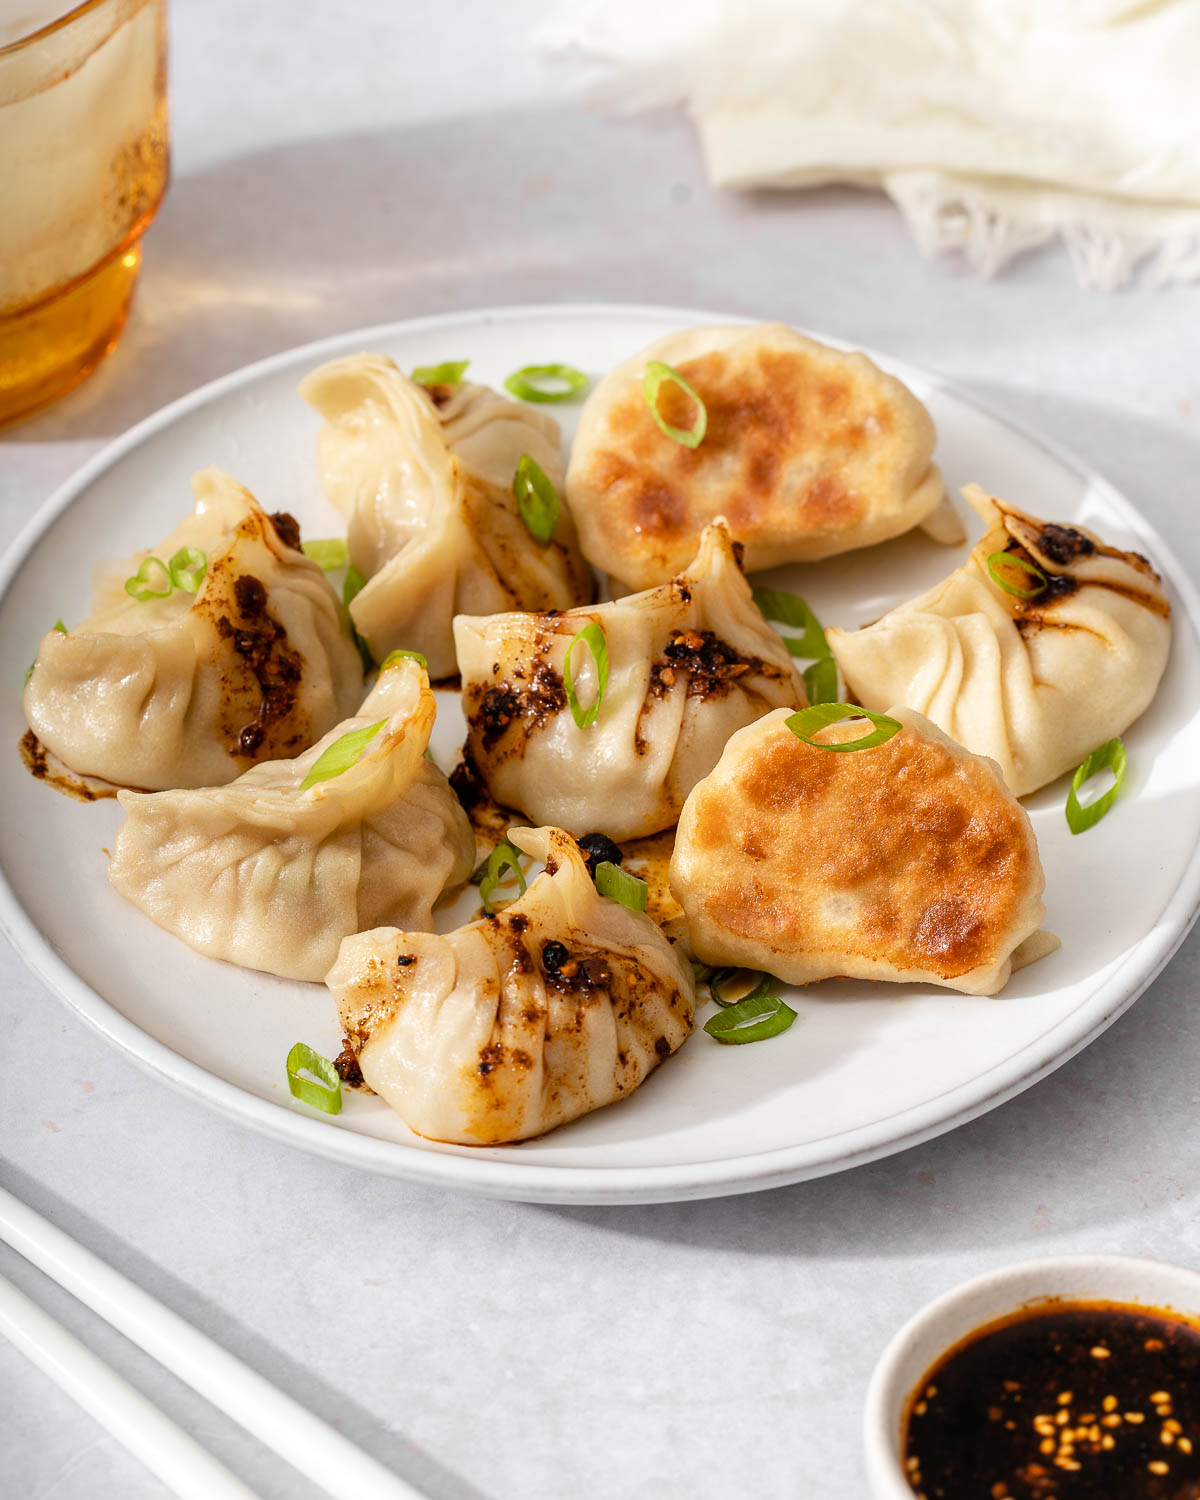 A plate of pork and cabbage dumplings garnished.